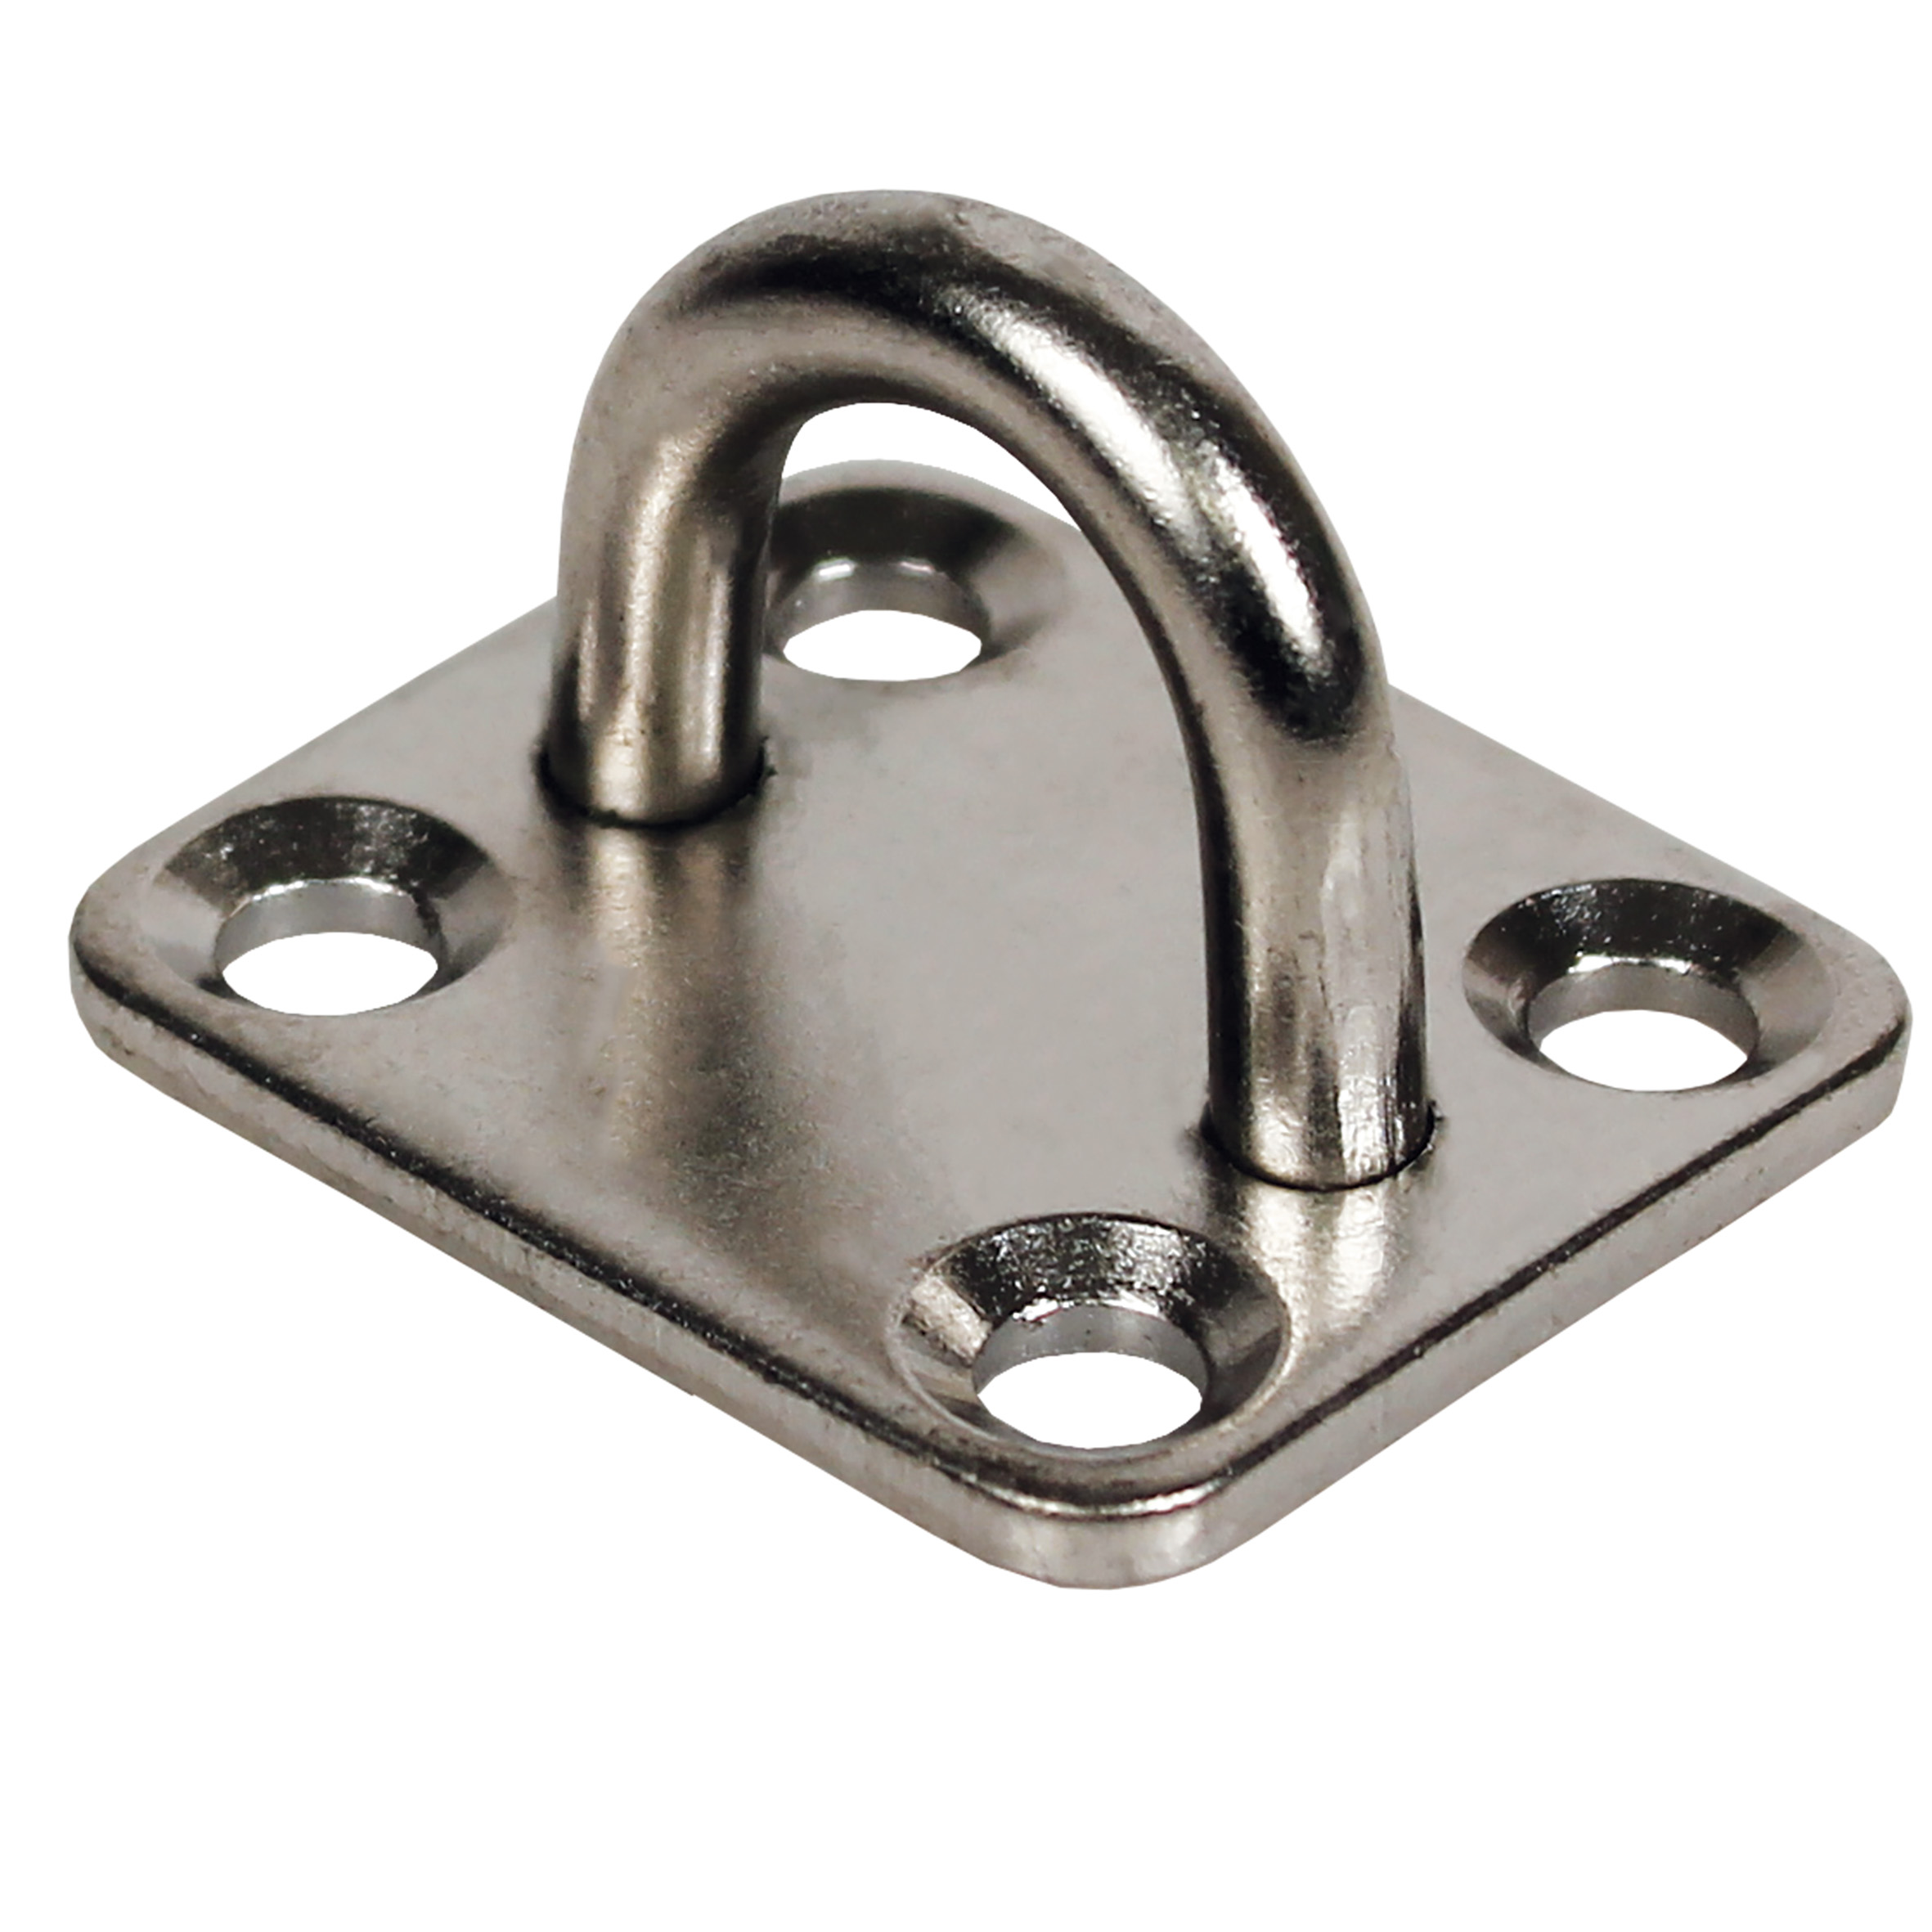 Pad eye on mounting plate squarred - Stainless steel - Square - 